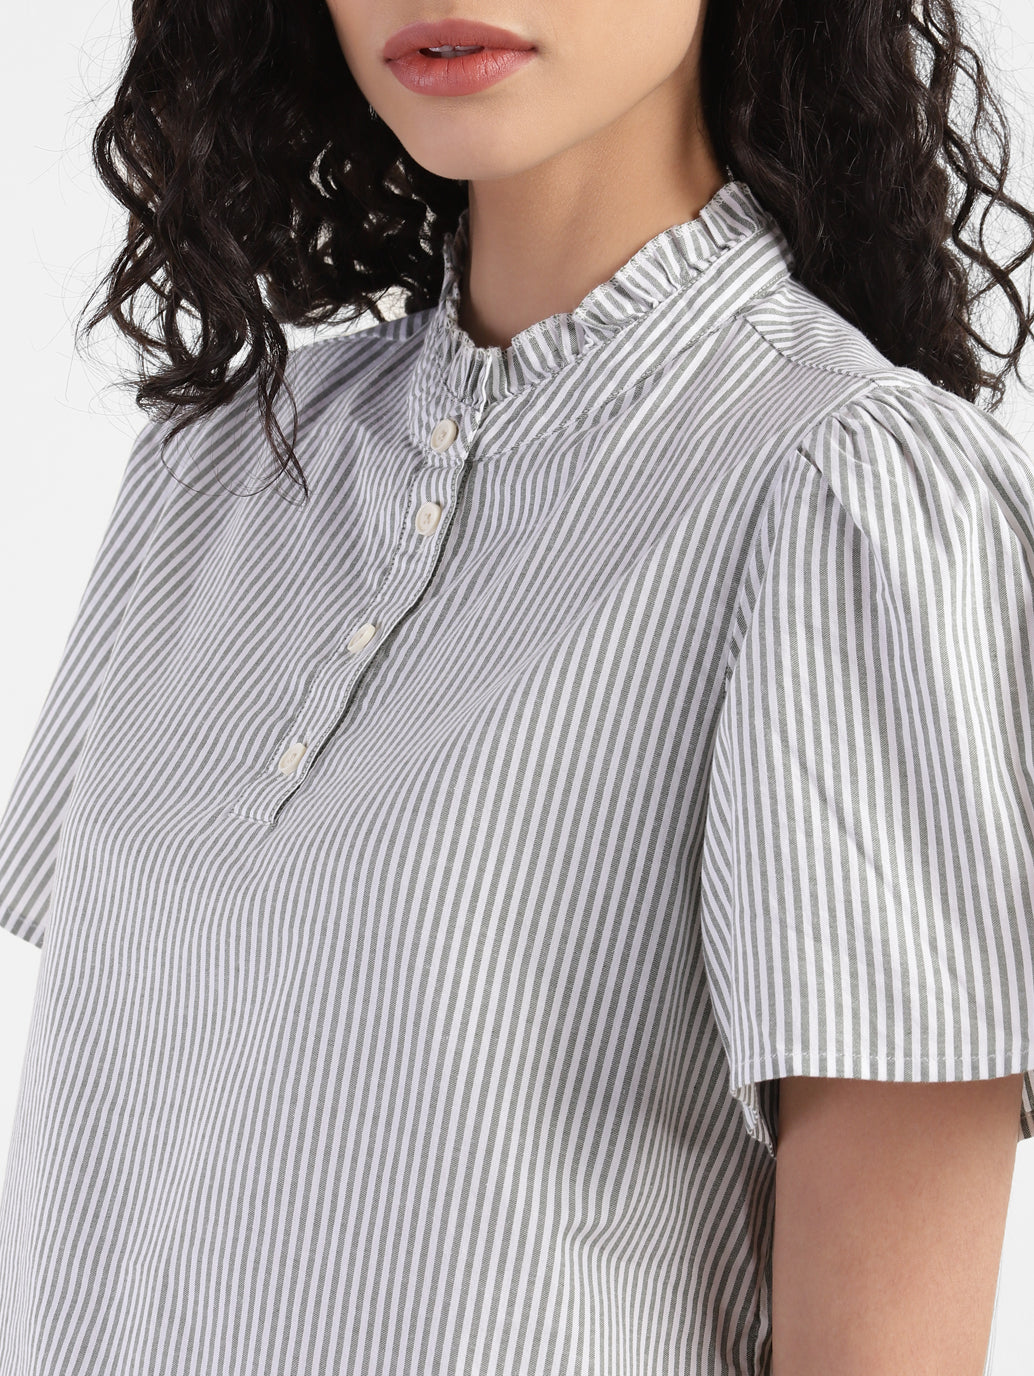 Women's Striped Band Neck Top